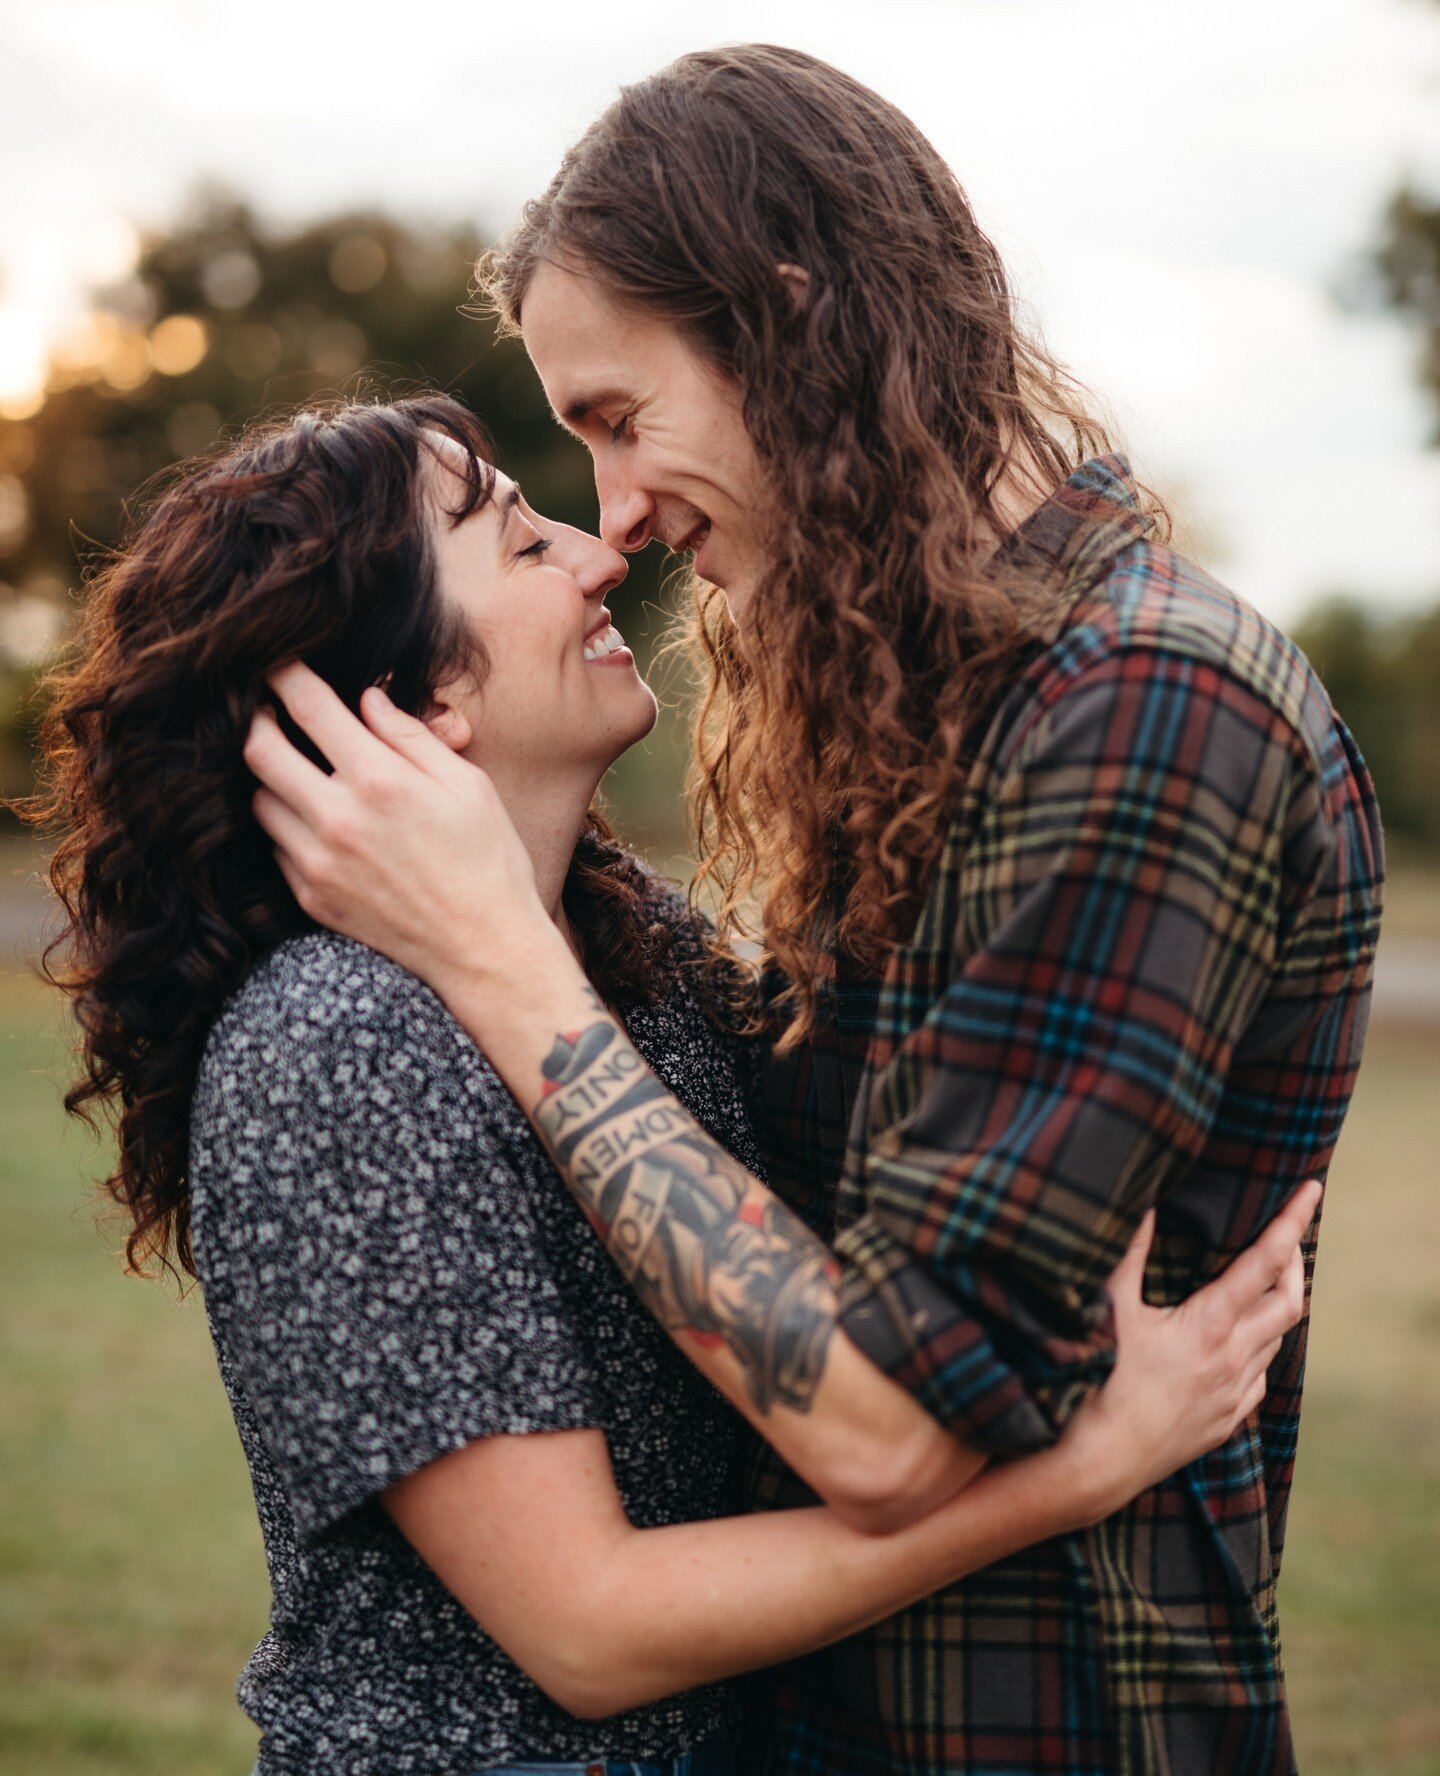 Happy Valentine's day to those who celebrate &hearts;️ We hope you get to snuggle those you love a little closer today!⁠
⁠
#ValentinesDay #Vday #RVA #RichmondPhotographer #QueerPhotographer #RichmondEngagement #InLove #Engagement Photos